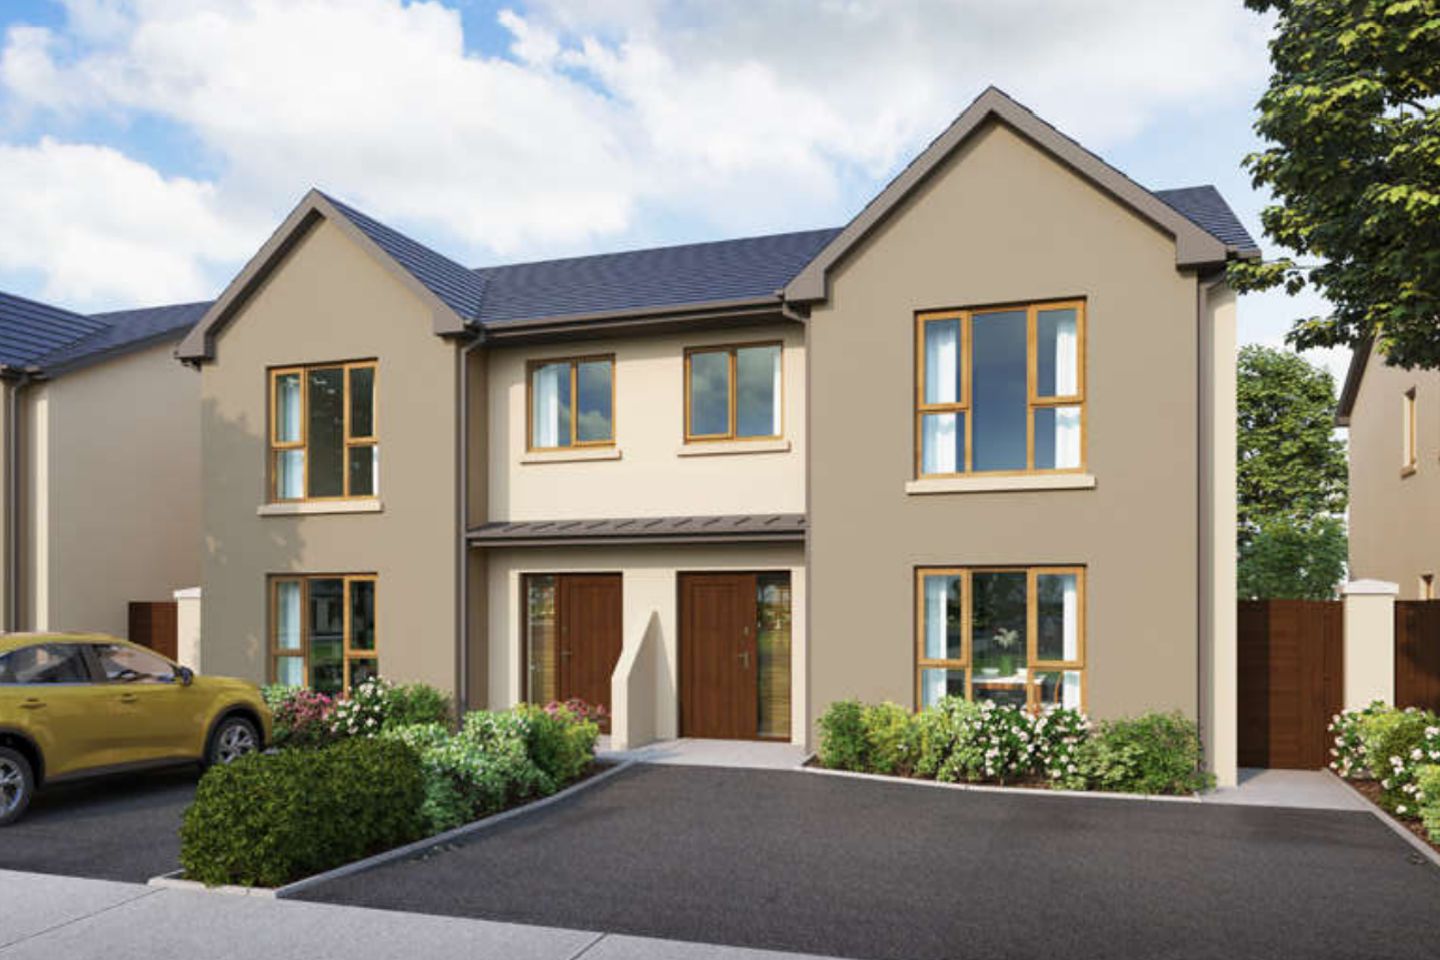 House Type E - 4-Bed Semi-Detached, Lakeview, Lakeview, Glenamaddy, Glenamaddy, Co. Galway